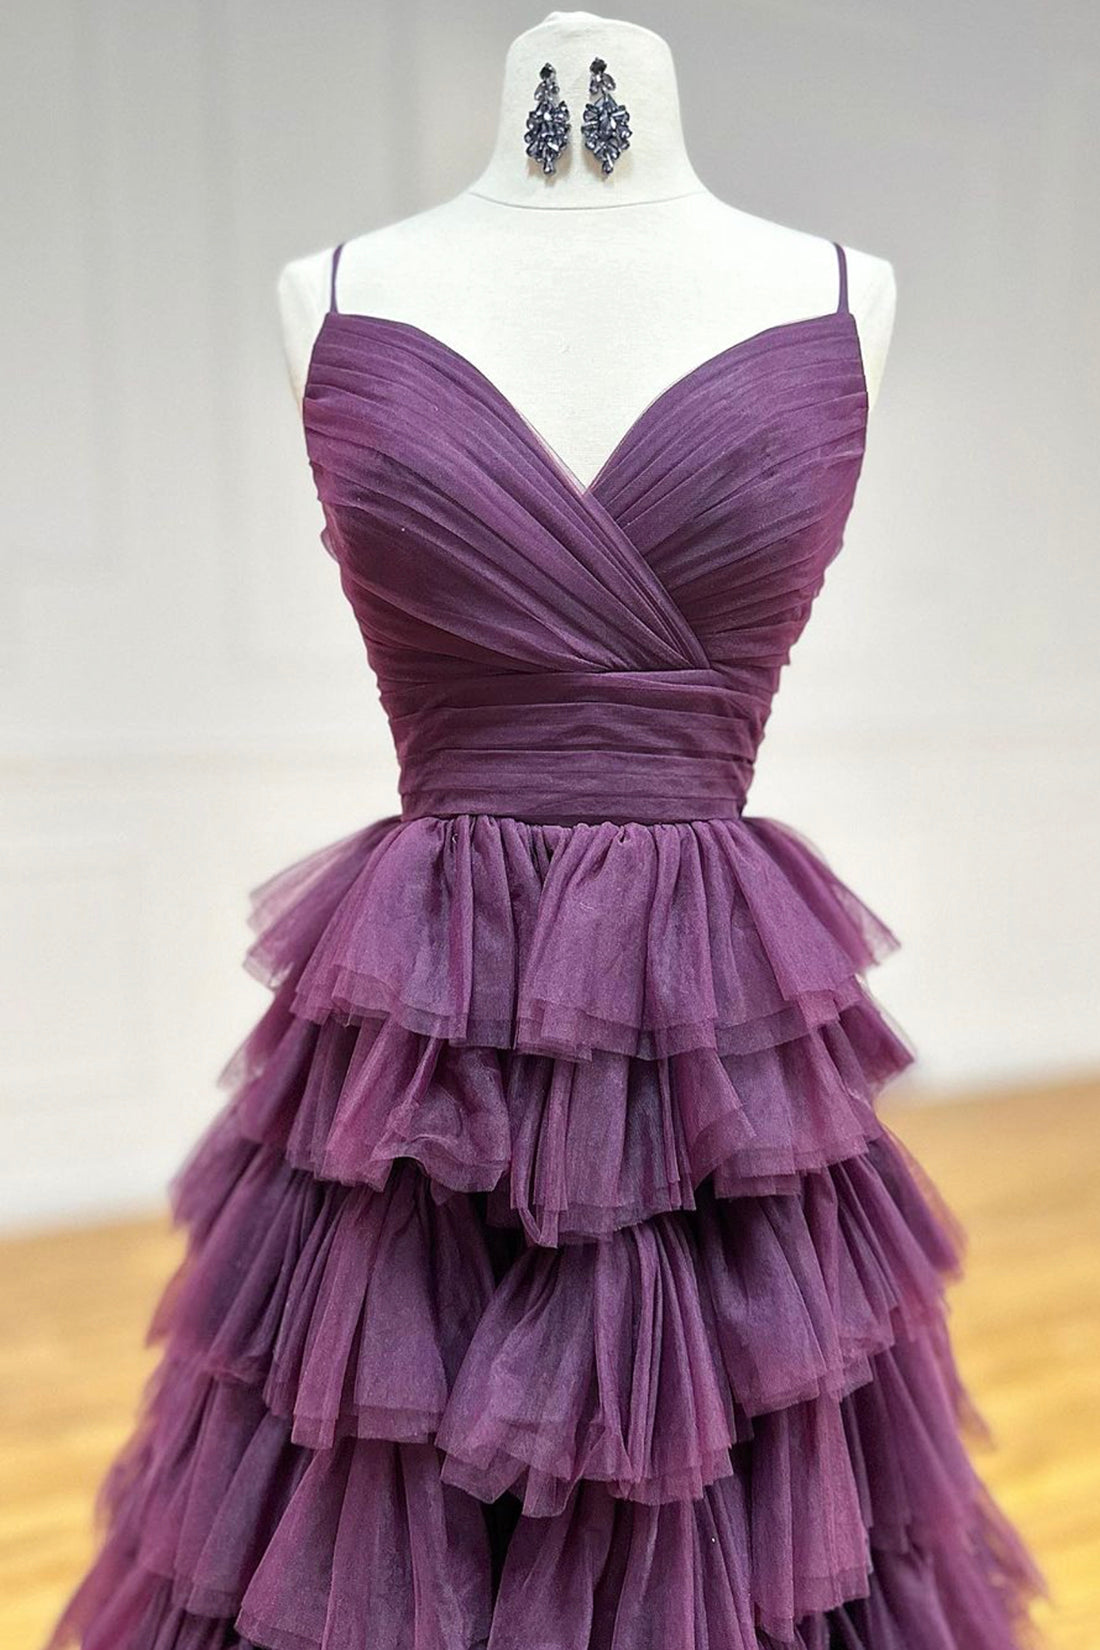 Purple Tulle Layers Long Prom Dress, Purple Spaghetti Strap A-Line Evening Party Dress